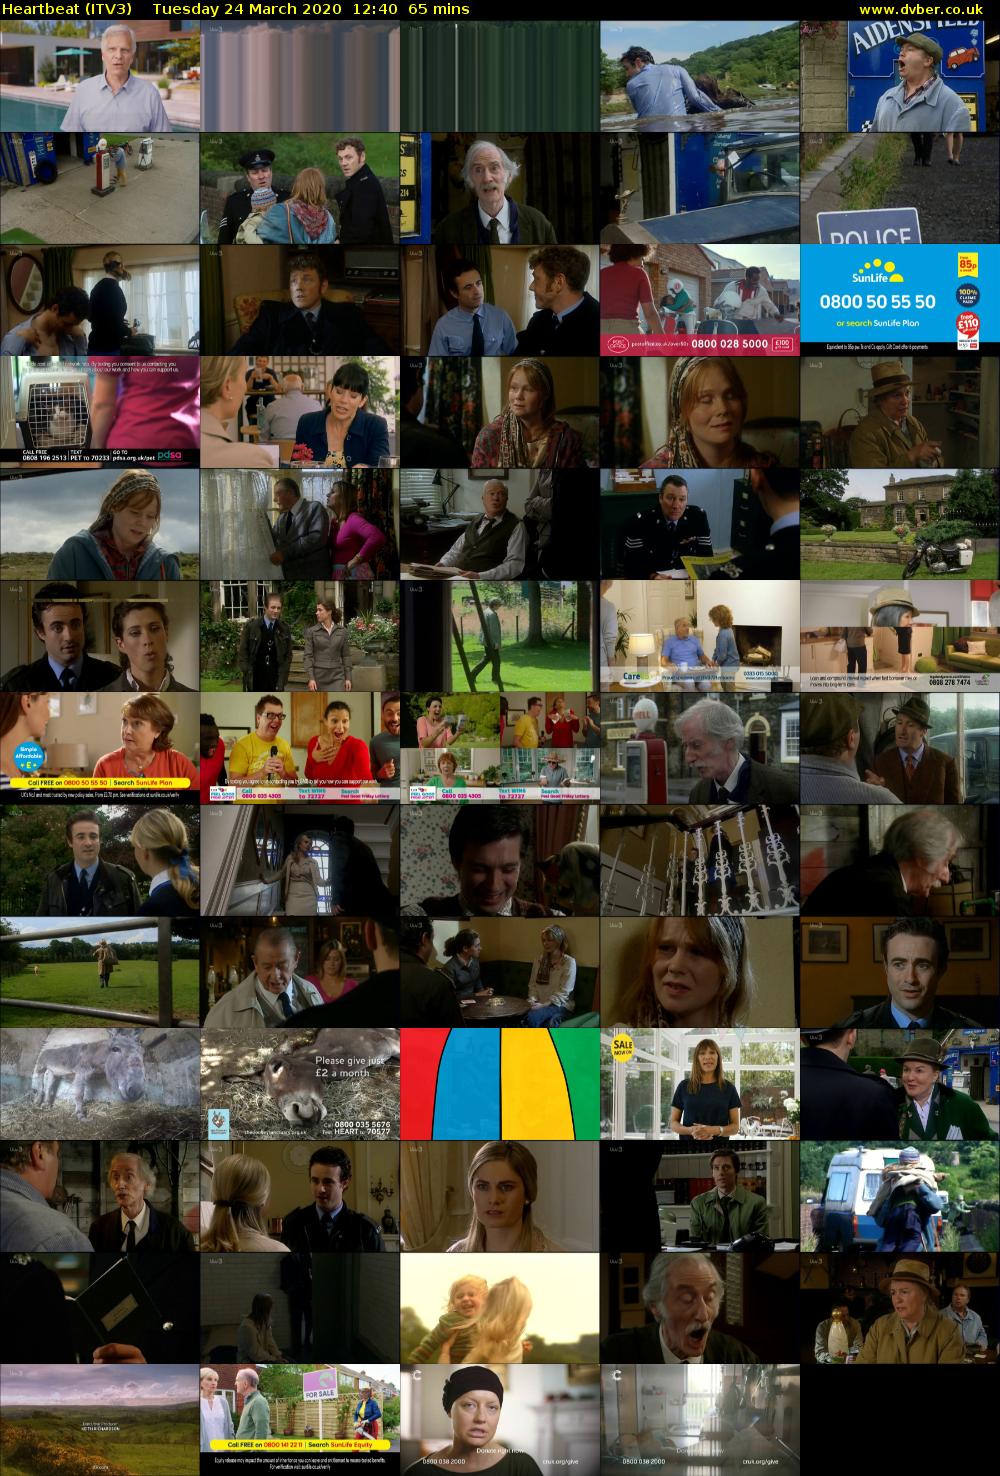 Heartbeat (ITV3) Tuesday 24 March 2020 12:40 - 13:45